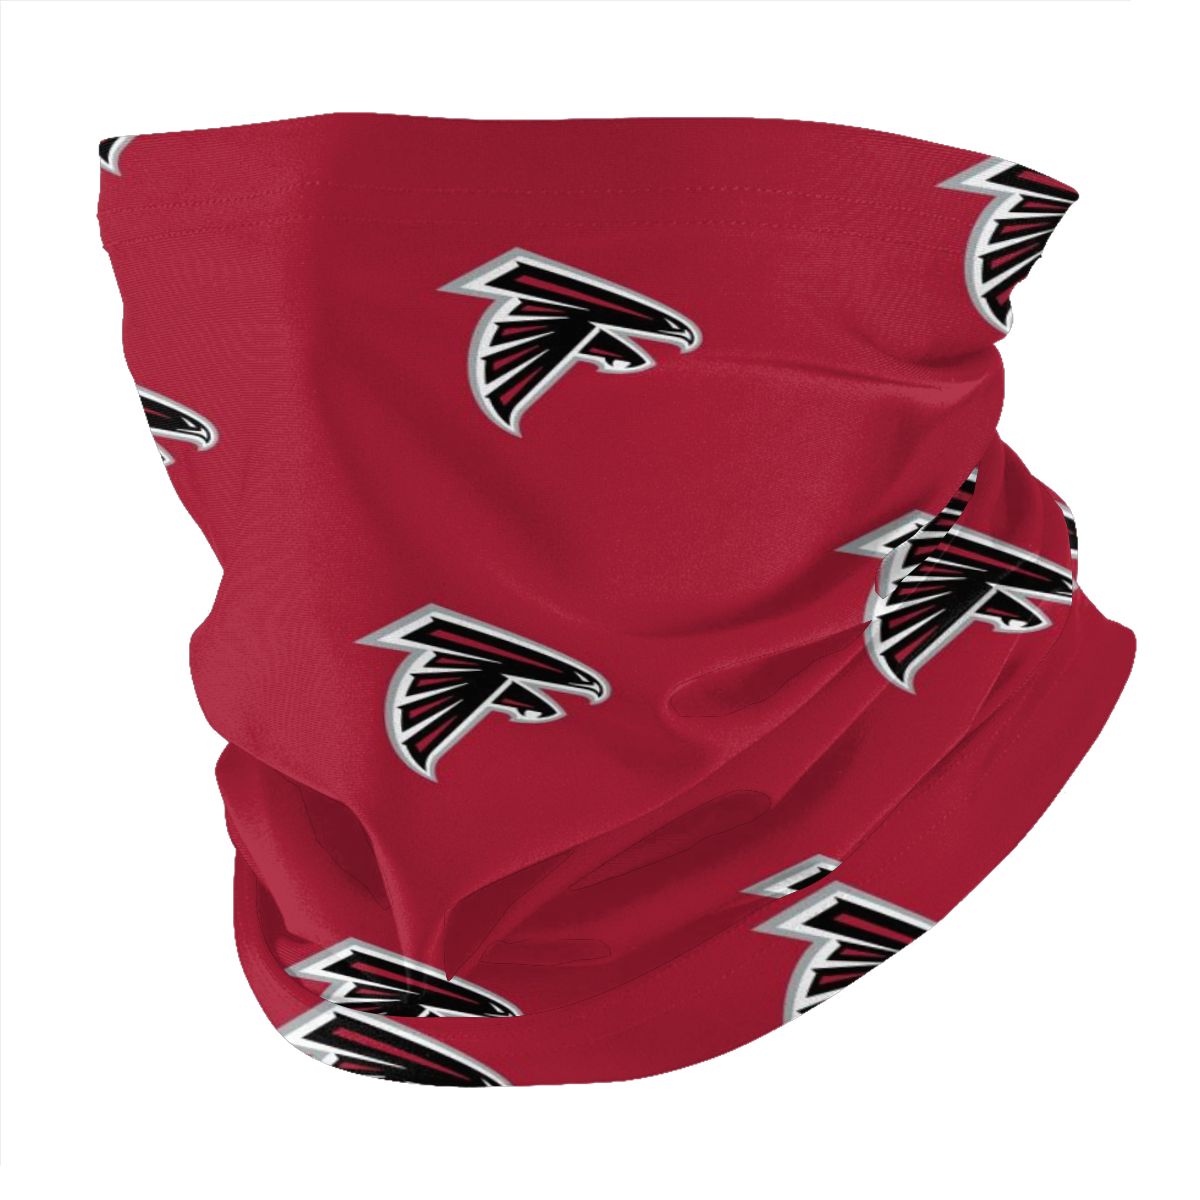 Reusble Mouth Cover Bandanas Atlanta Falcons Variety Head Scarf Face Mask With PM 2.5 Filter